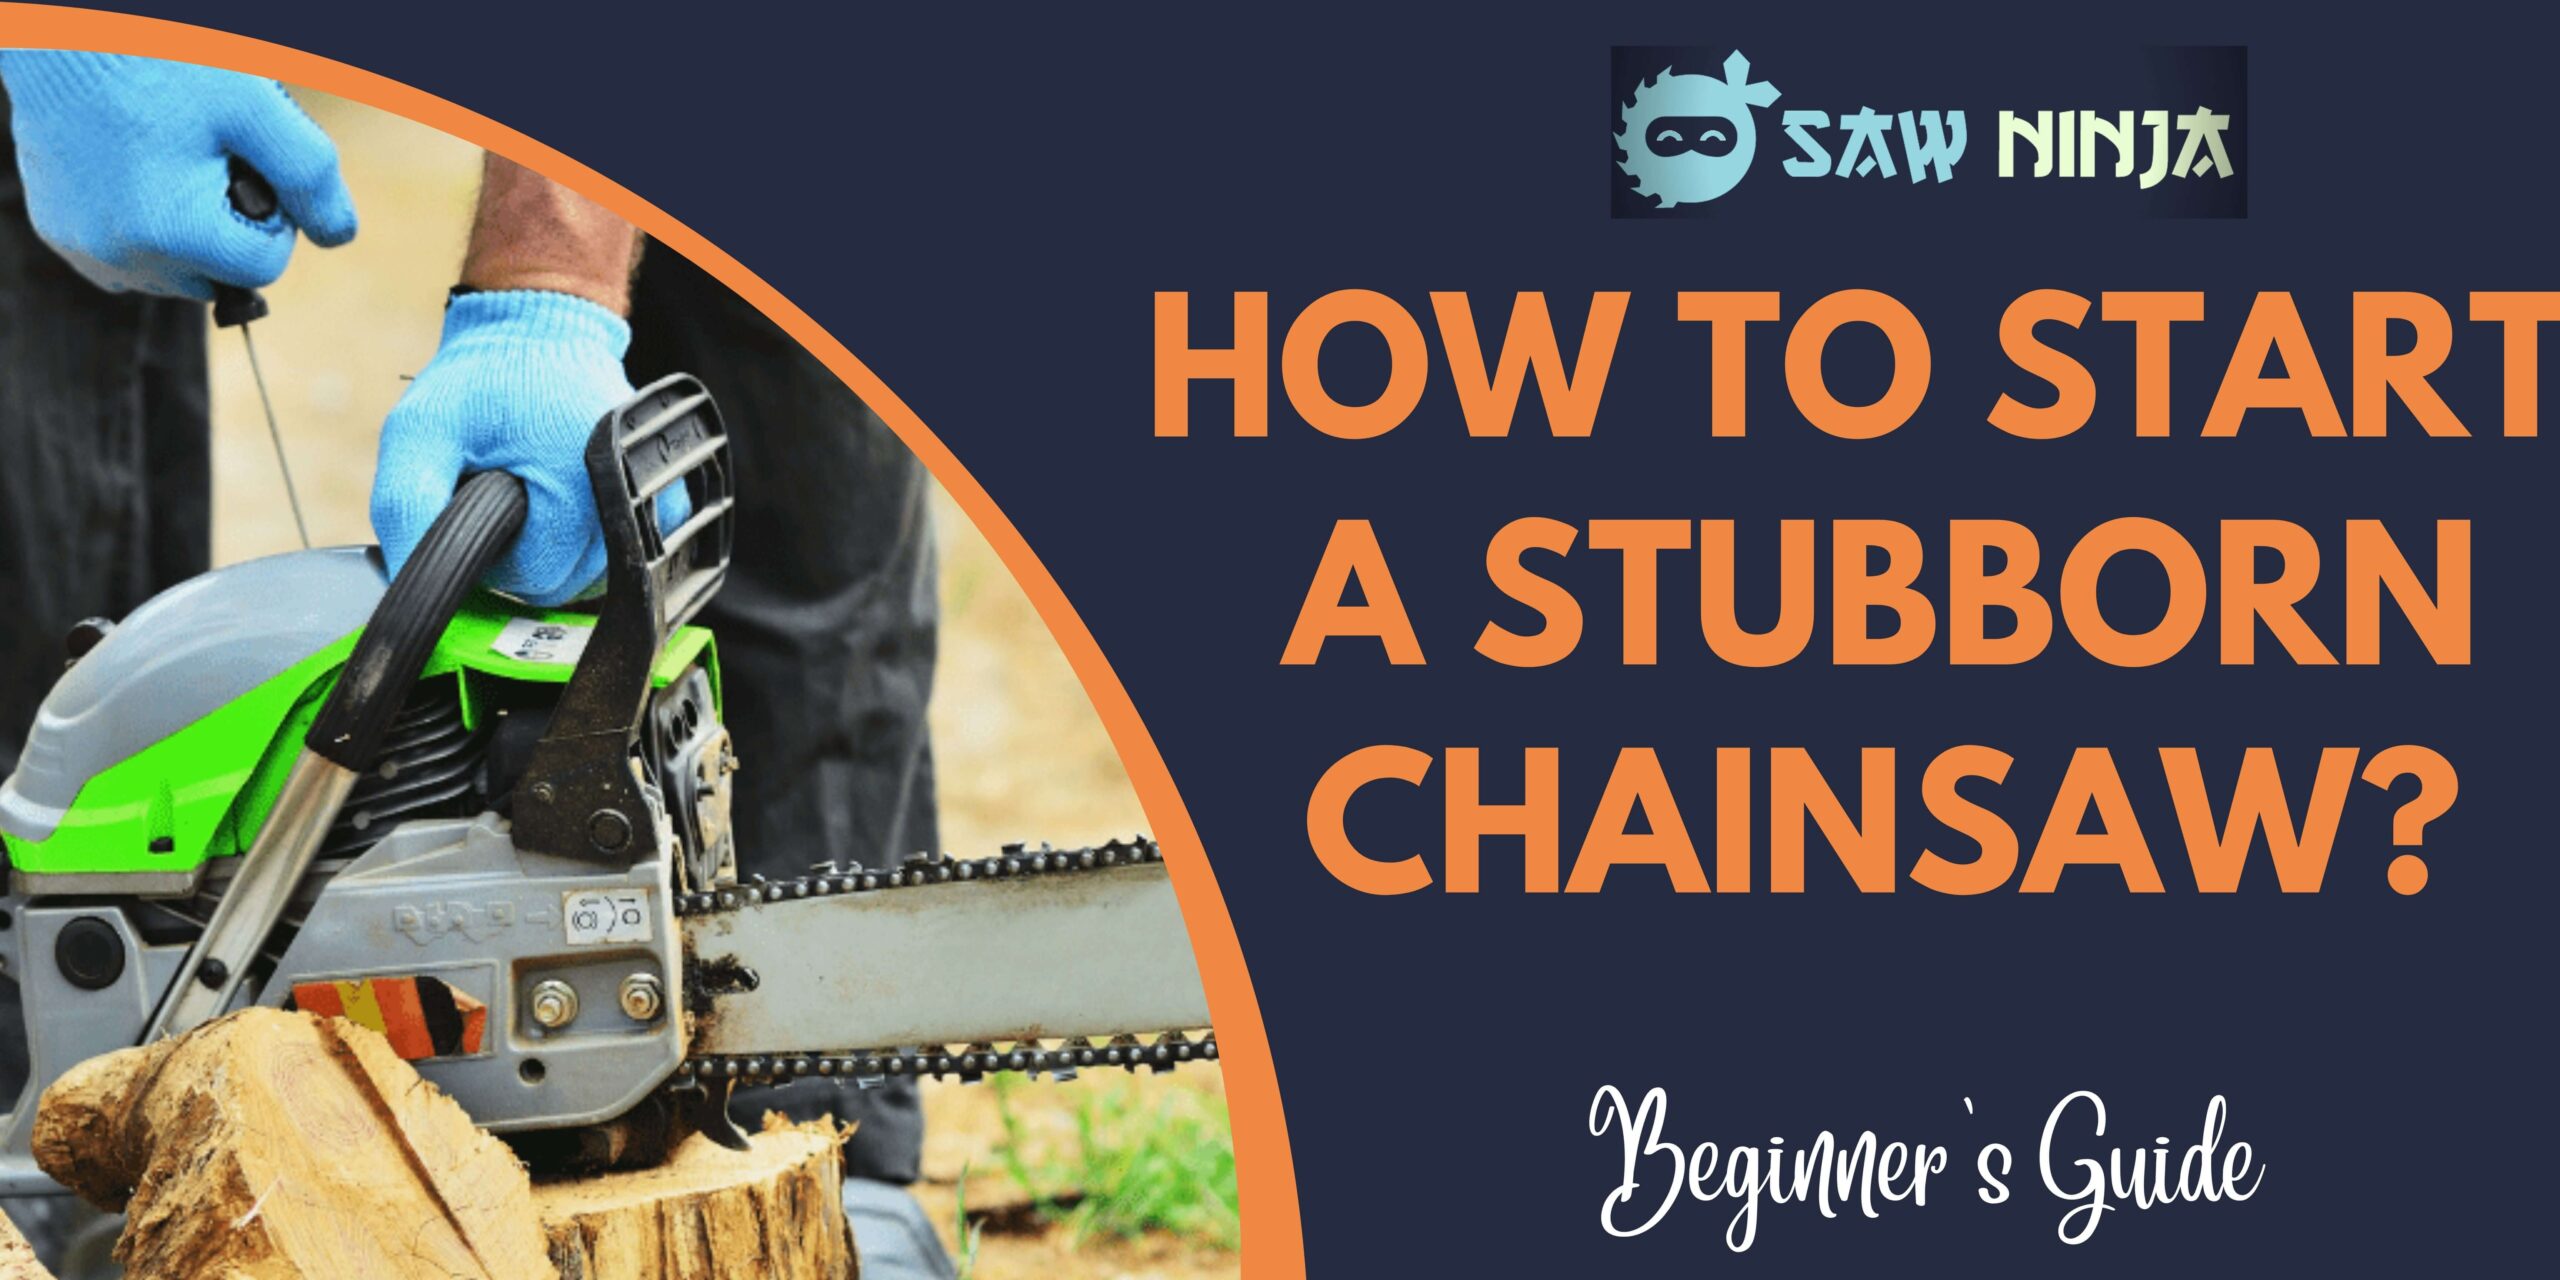 How To Start A Stubborn Chainsaw